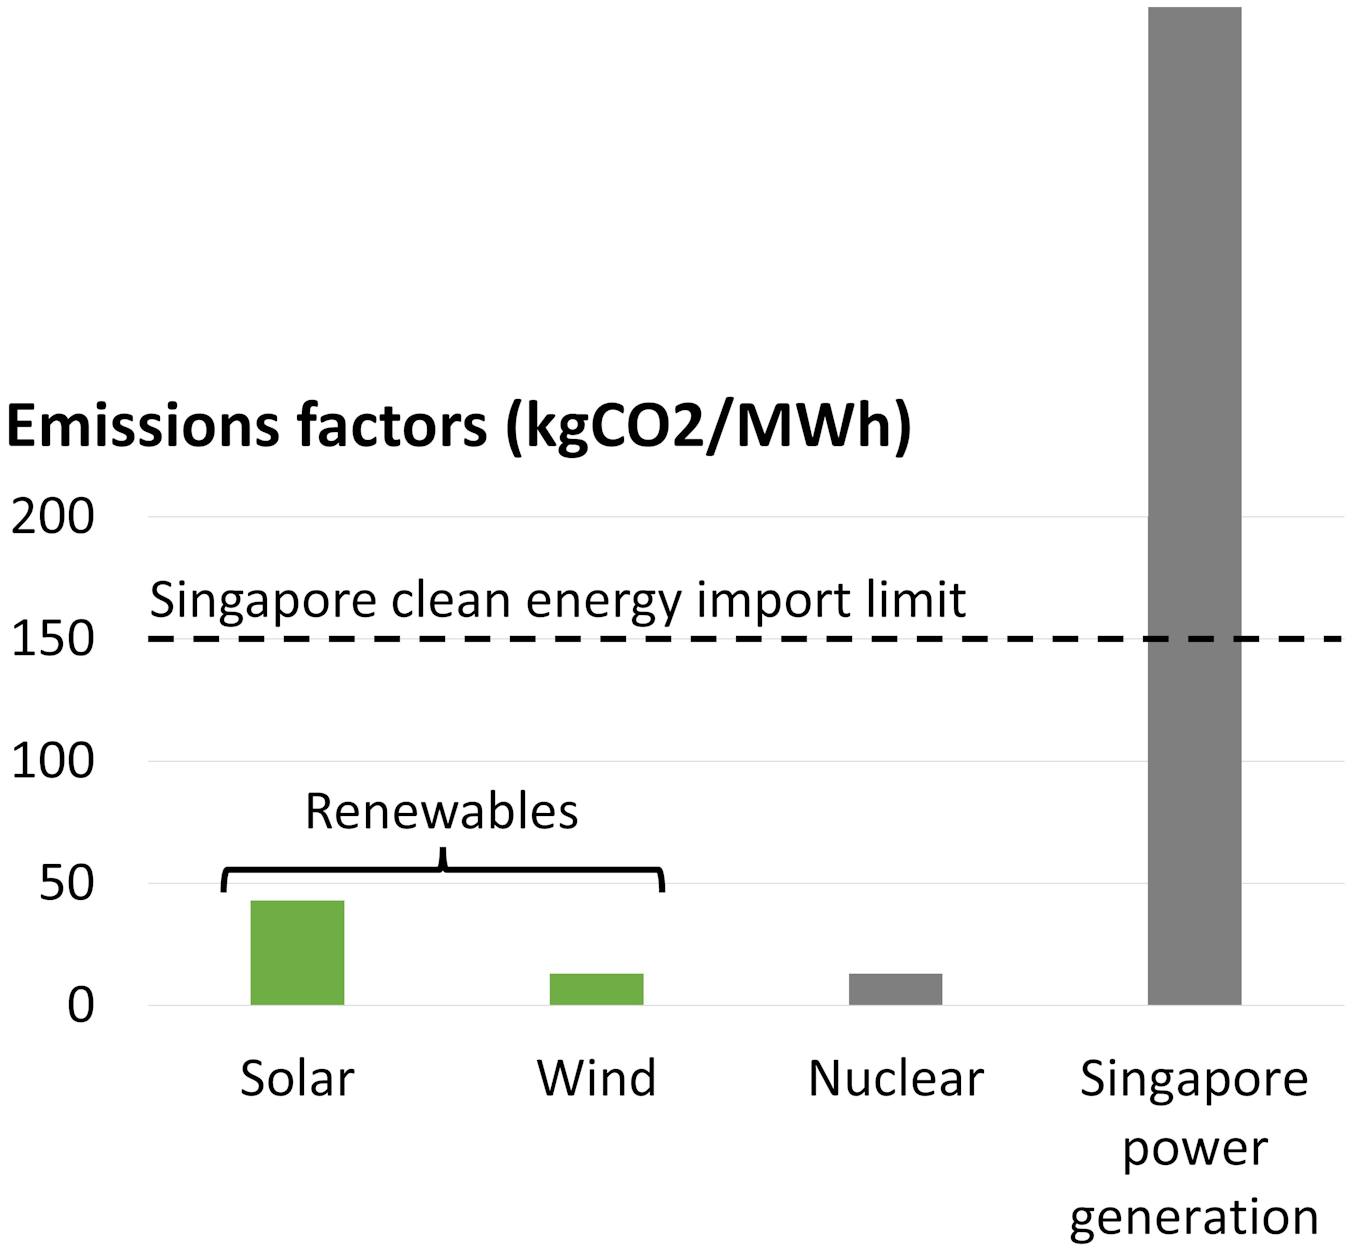 emissions factors solar wind nuclear and Singapore compared